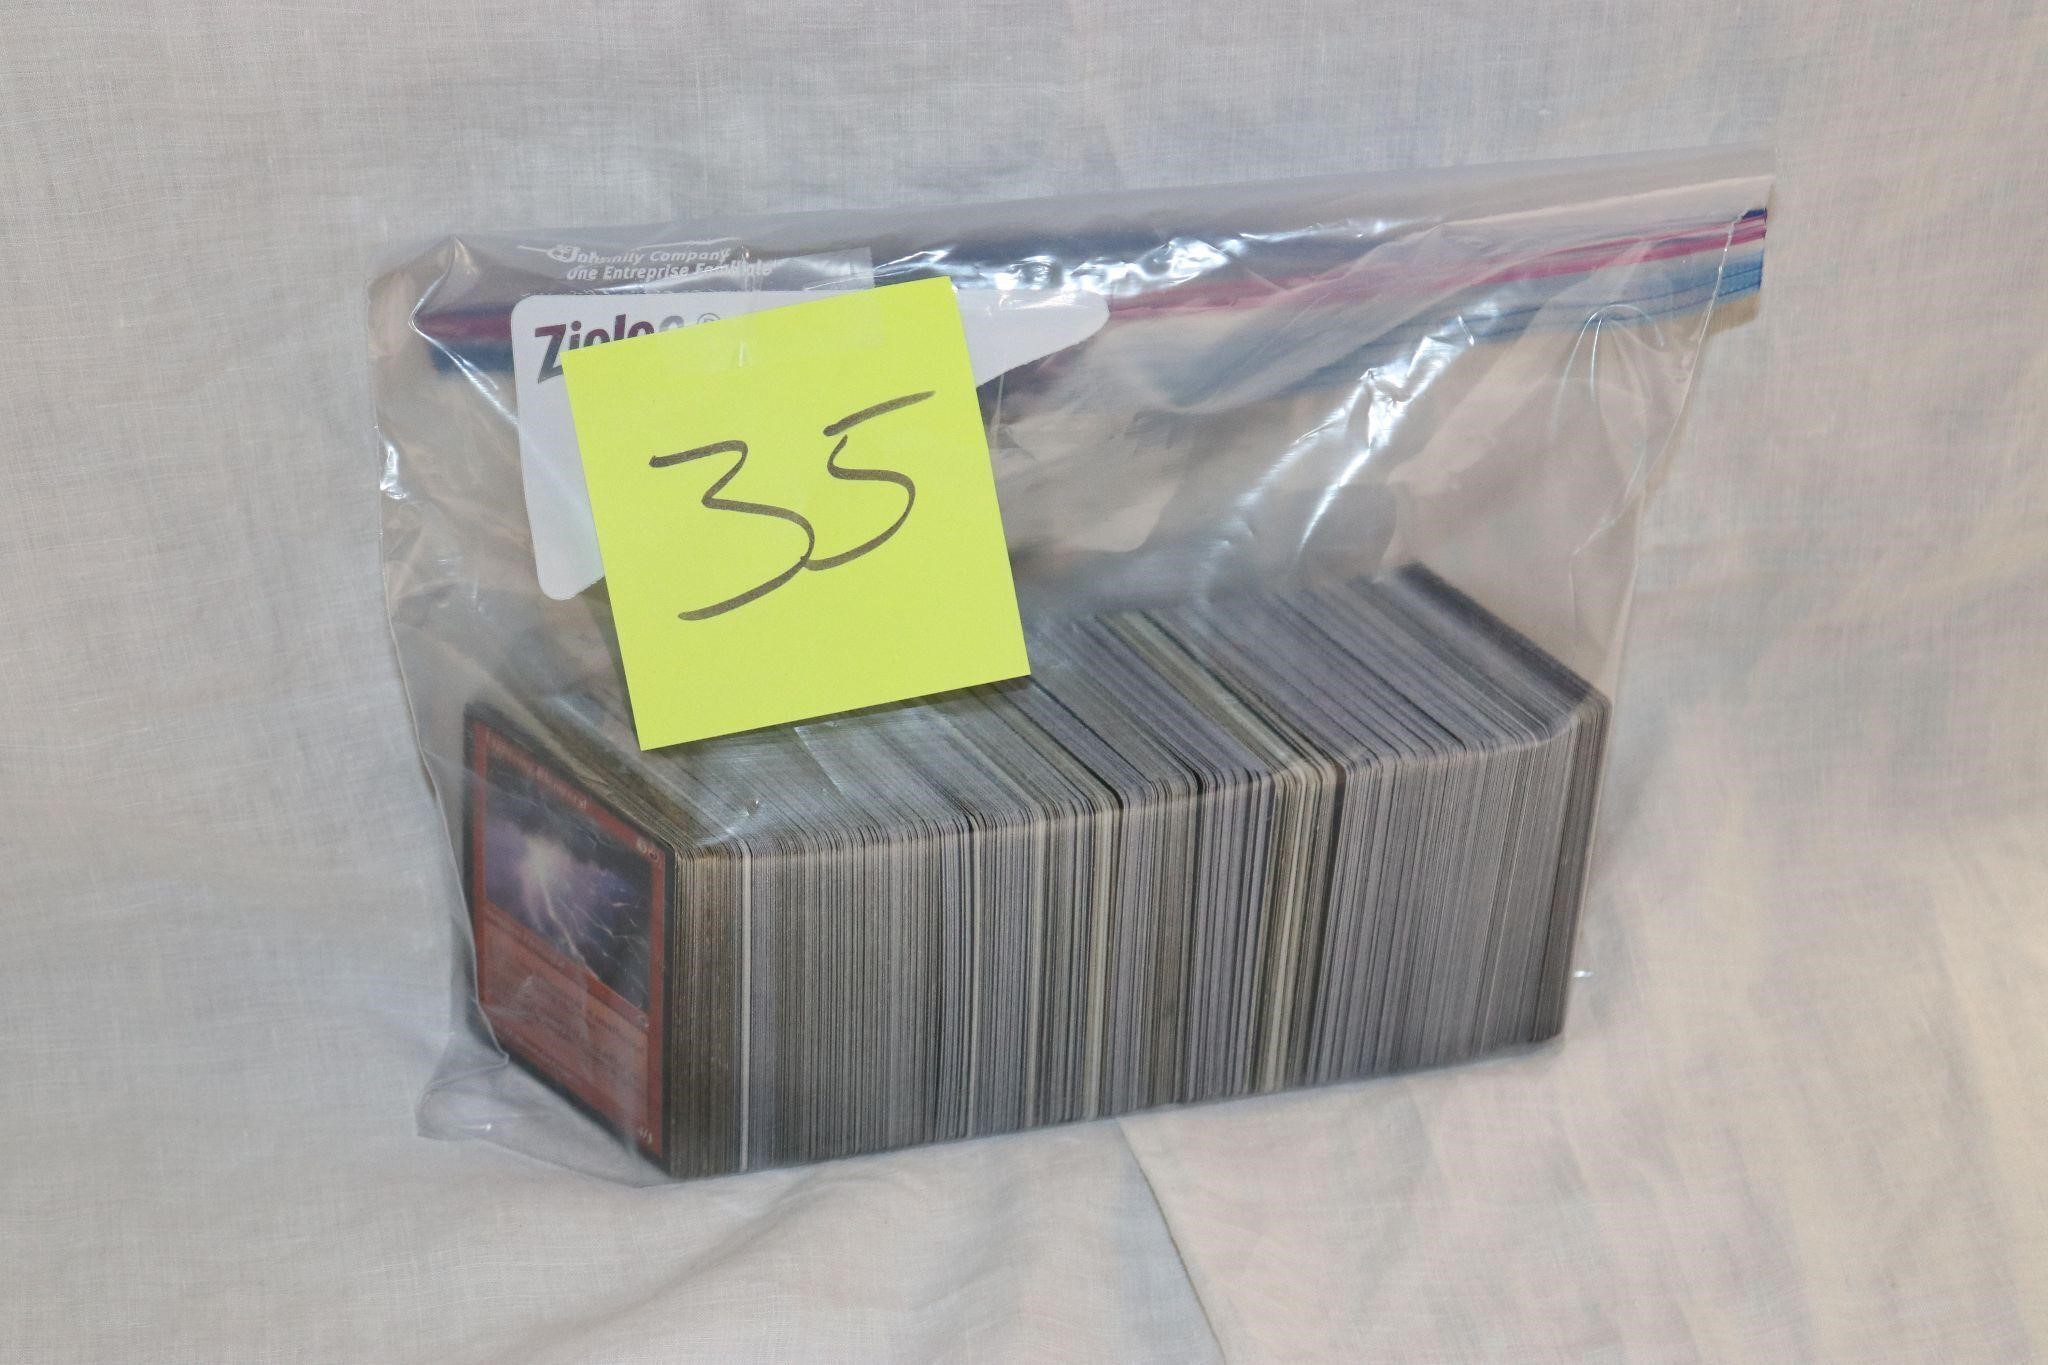 April Comic, Cards, and Toy Auction